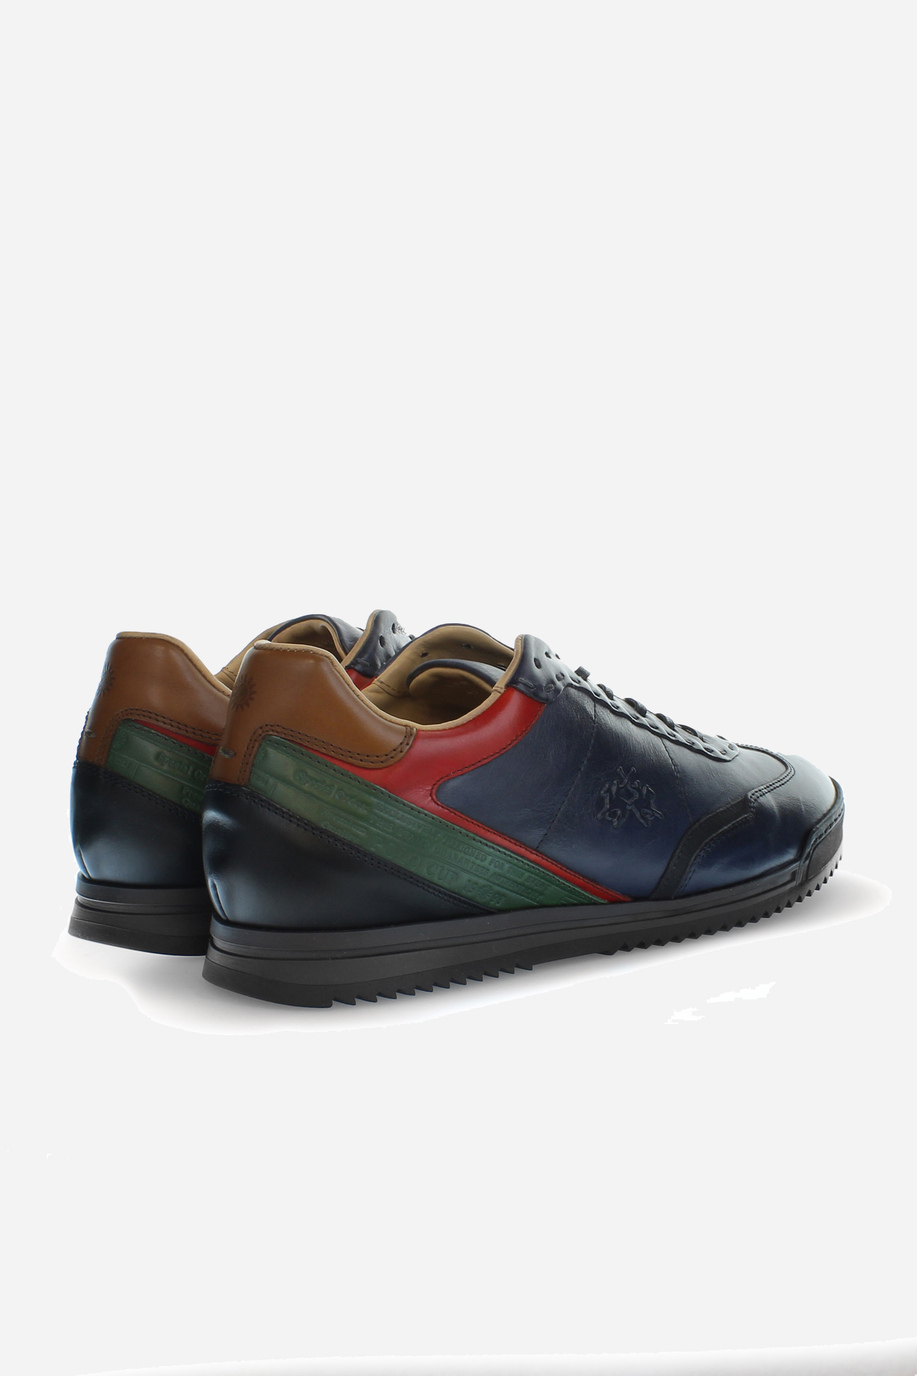 Men's calfskin trainer with contrasting leather inserts - test | La Martina - Official Online Shop